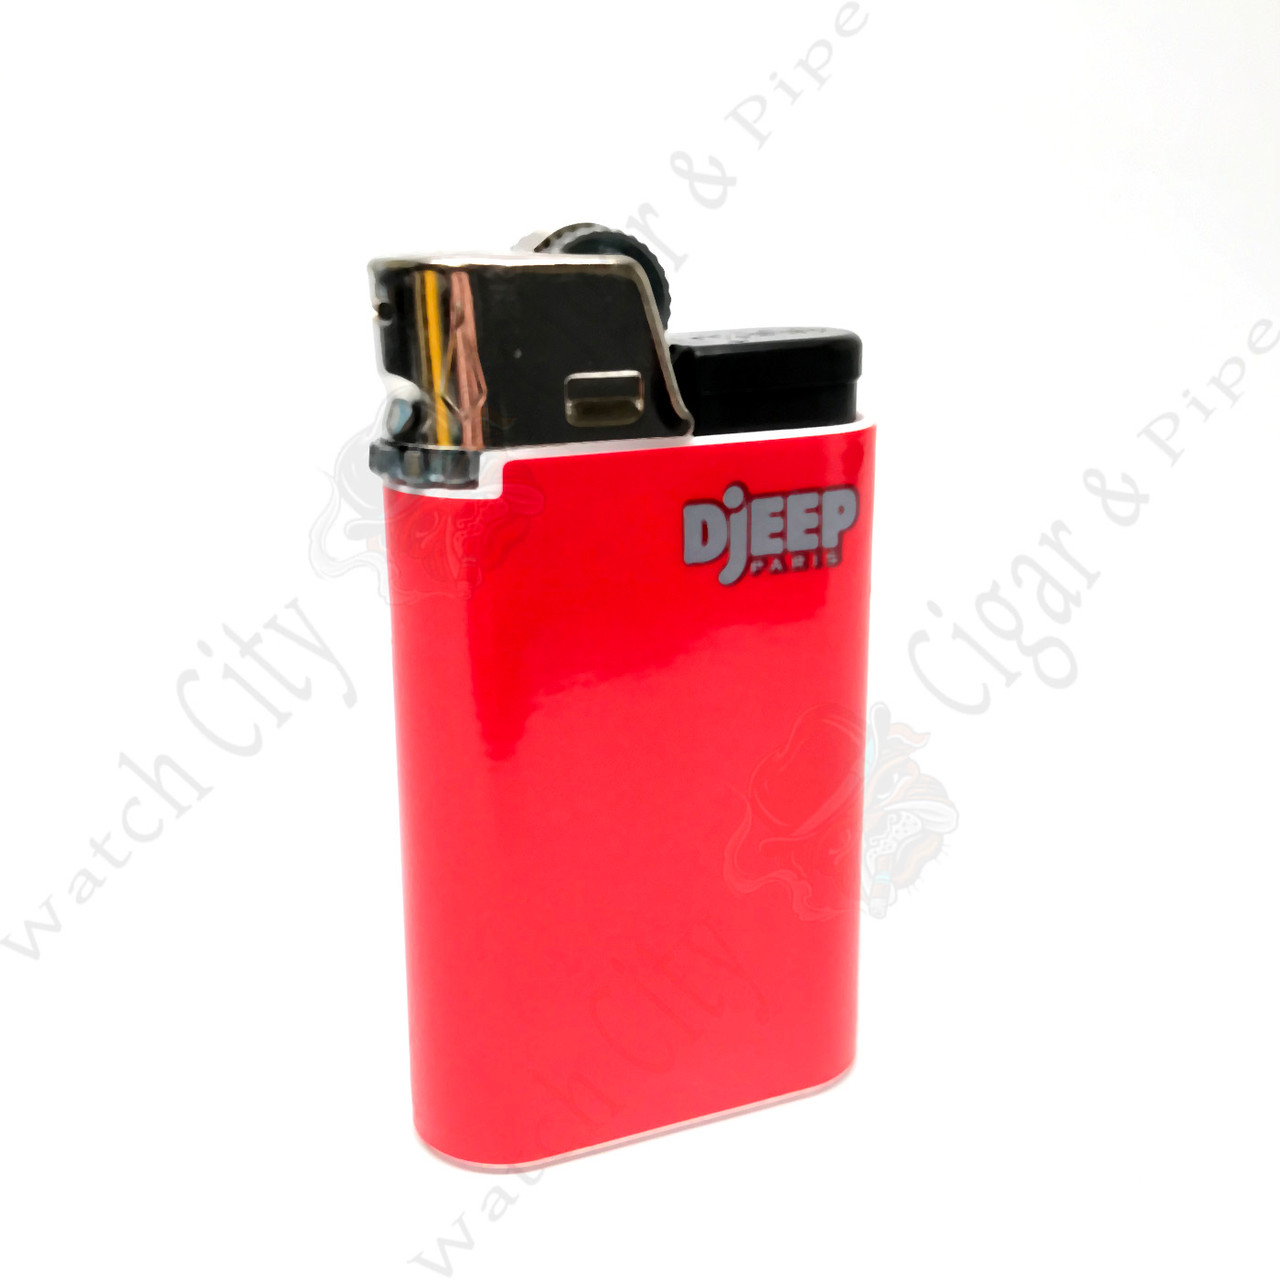 Djeep Lighter (No Shipping. Pickup Orders Only) - Watch City Cigar & Pipe